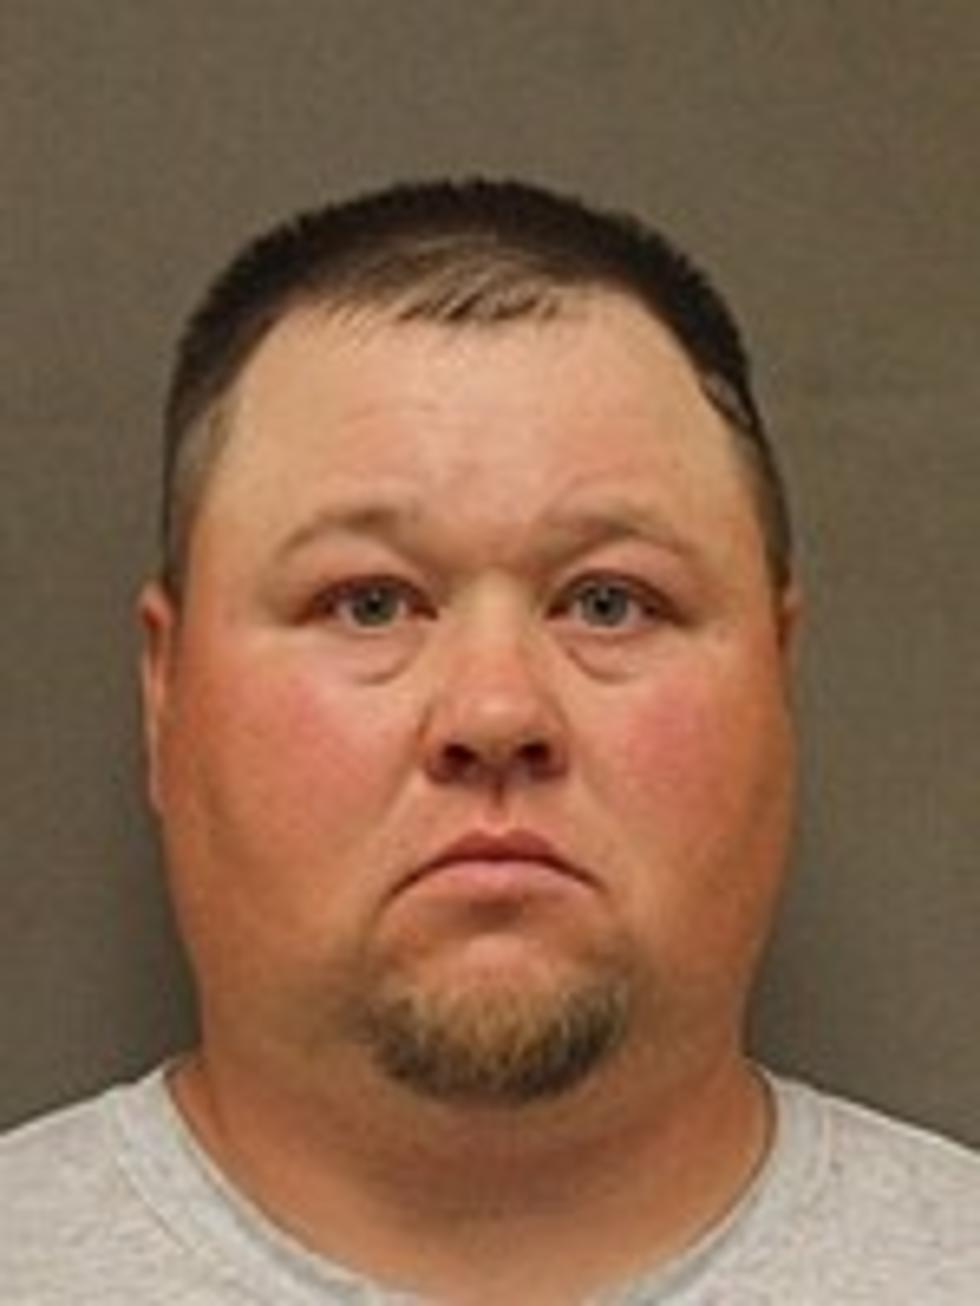 Missouri Man Given 189 Years in Prison for Abusing 2 Girls